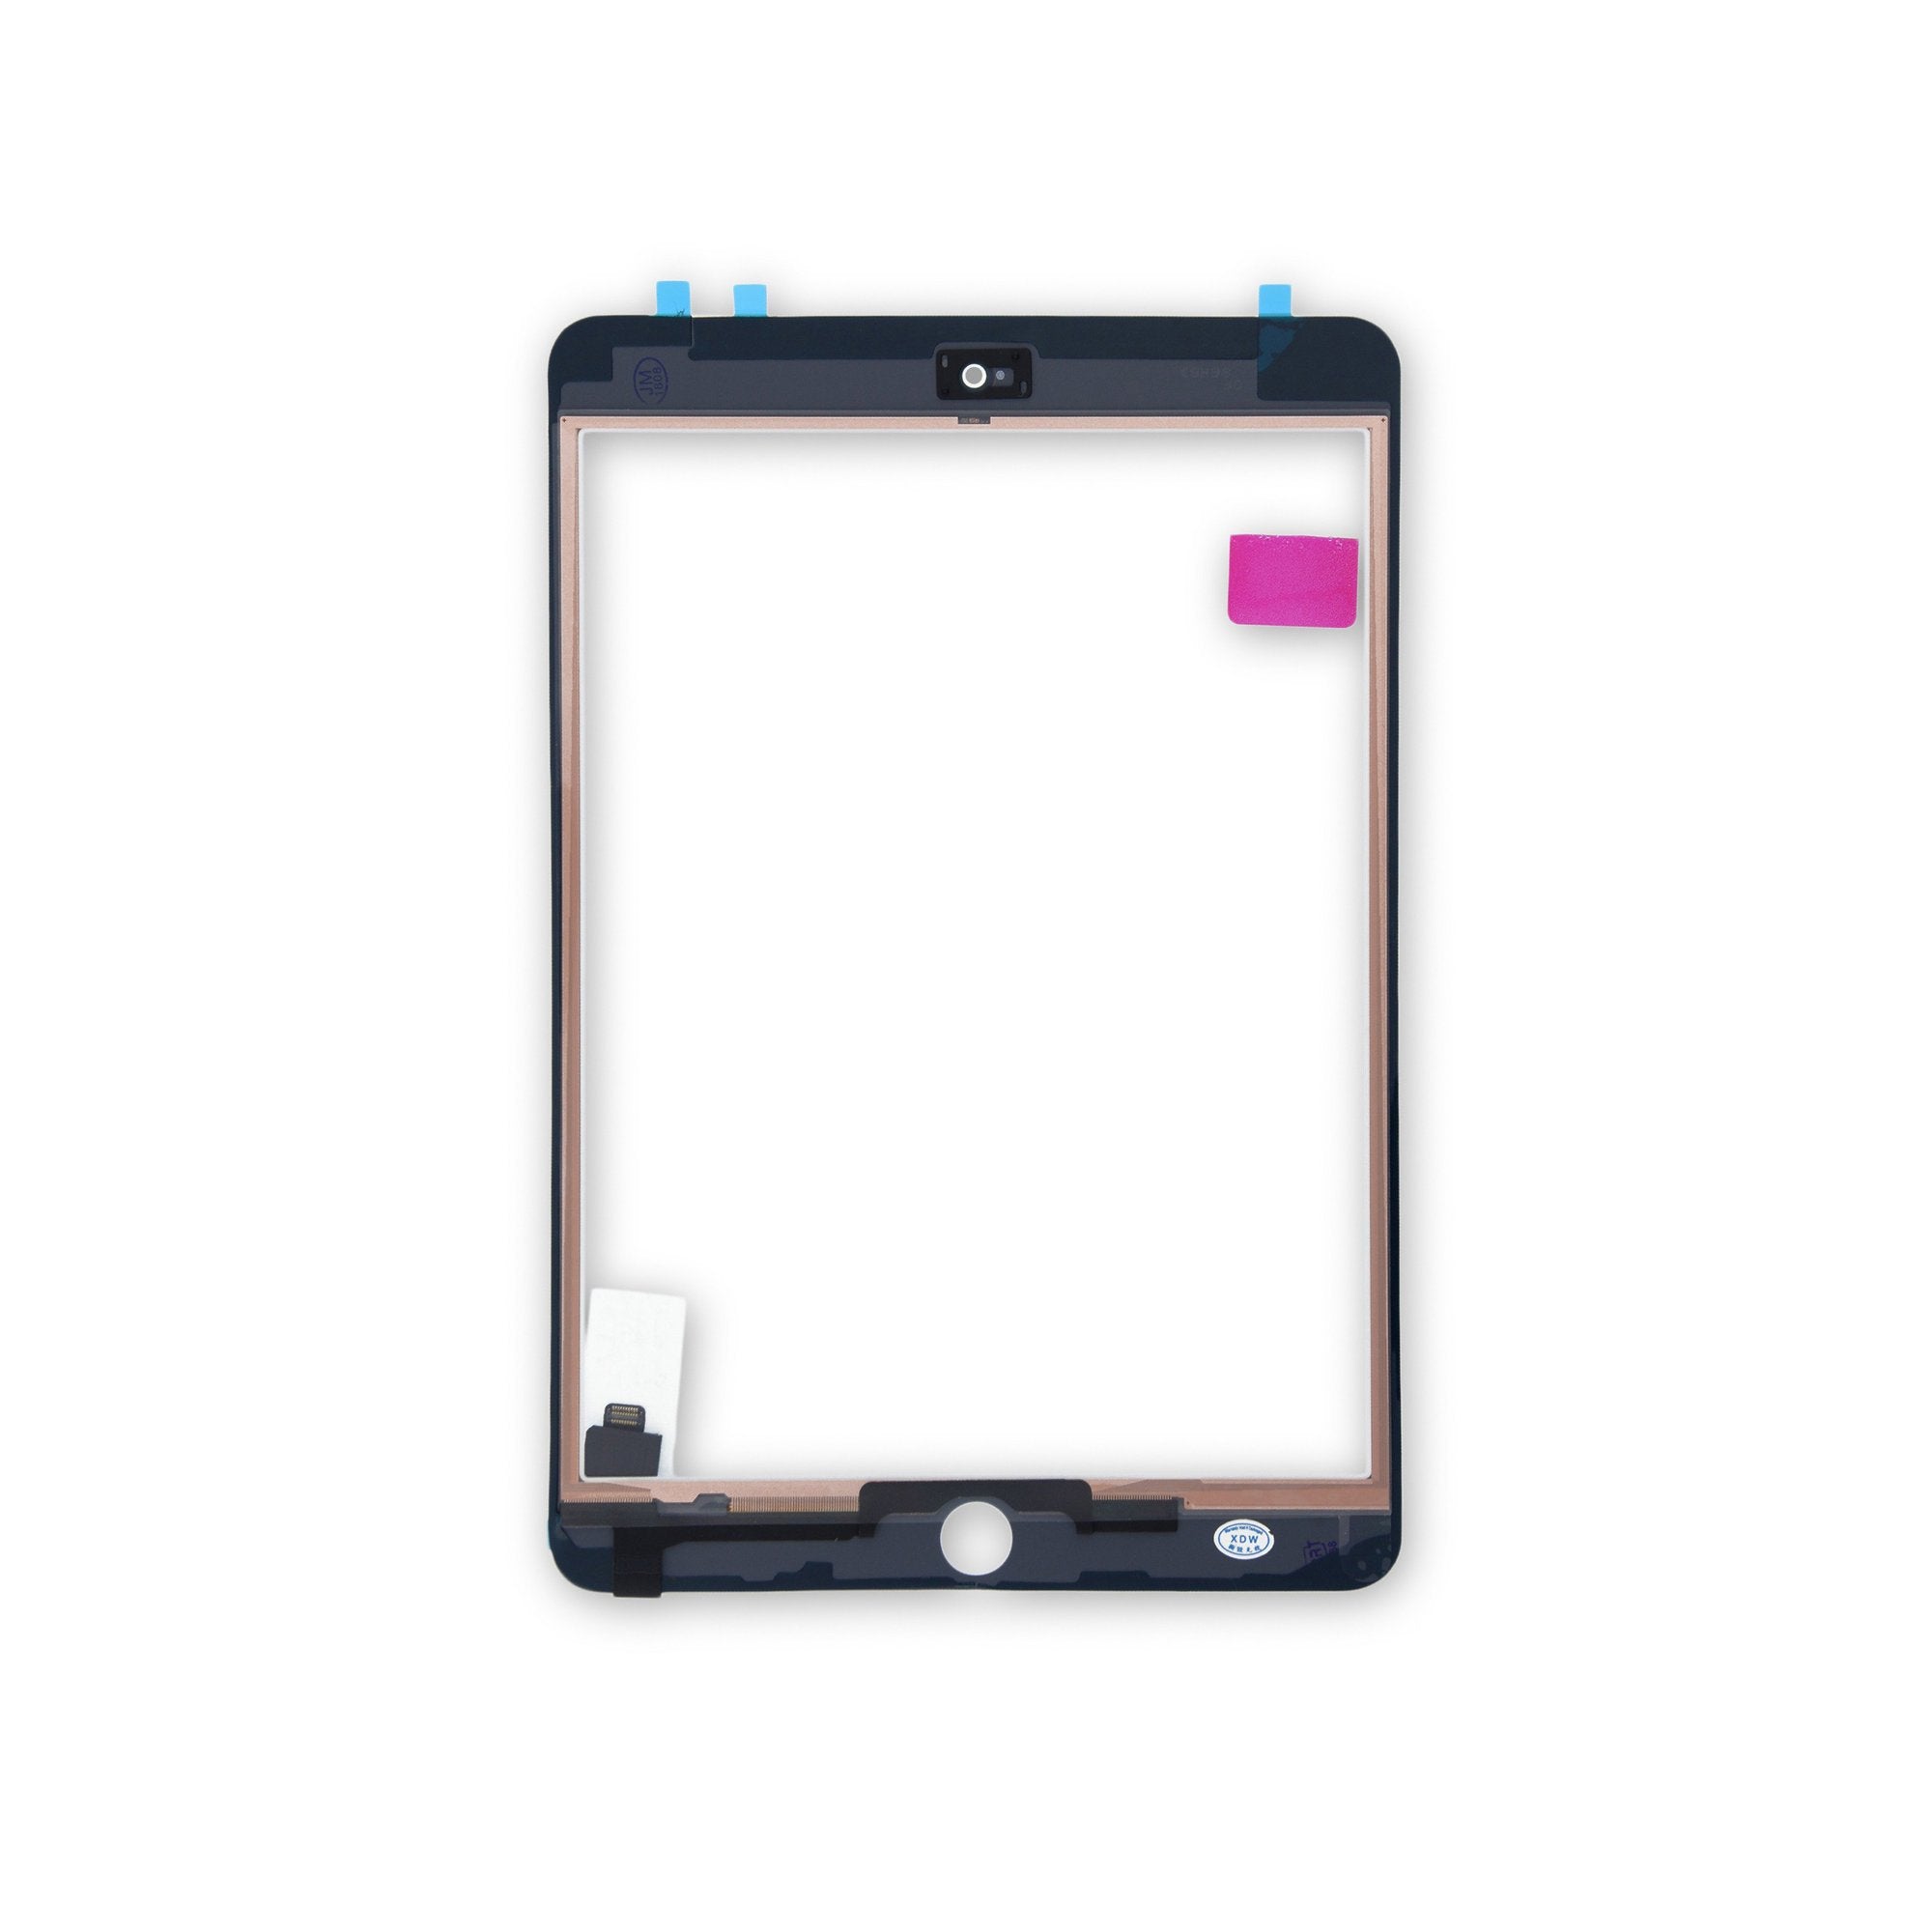 iPad mini 3 Screen Digitizer White New Part Only